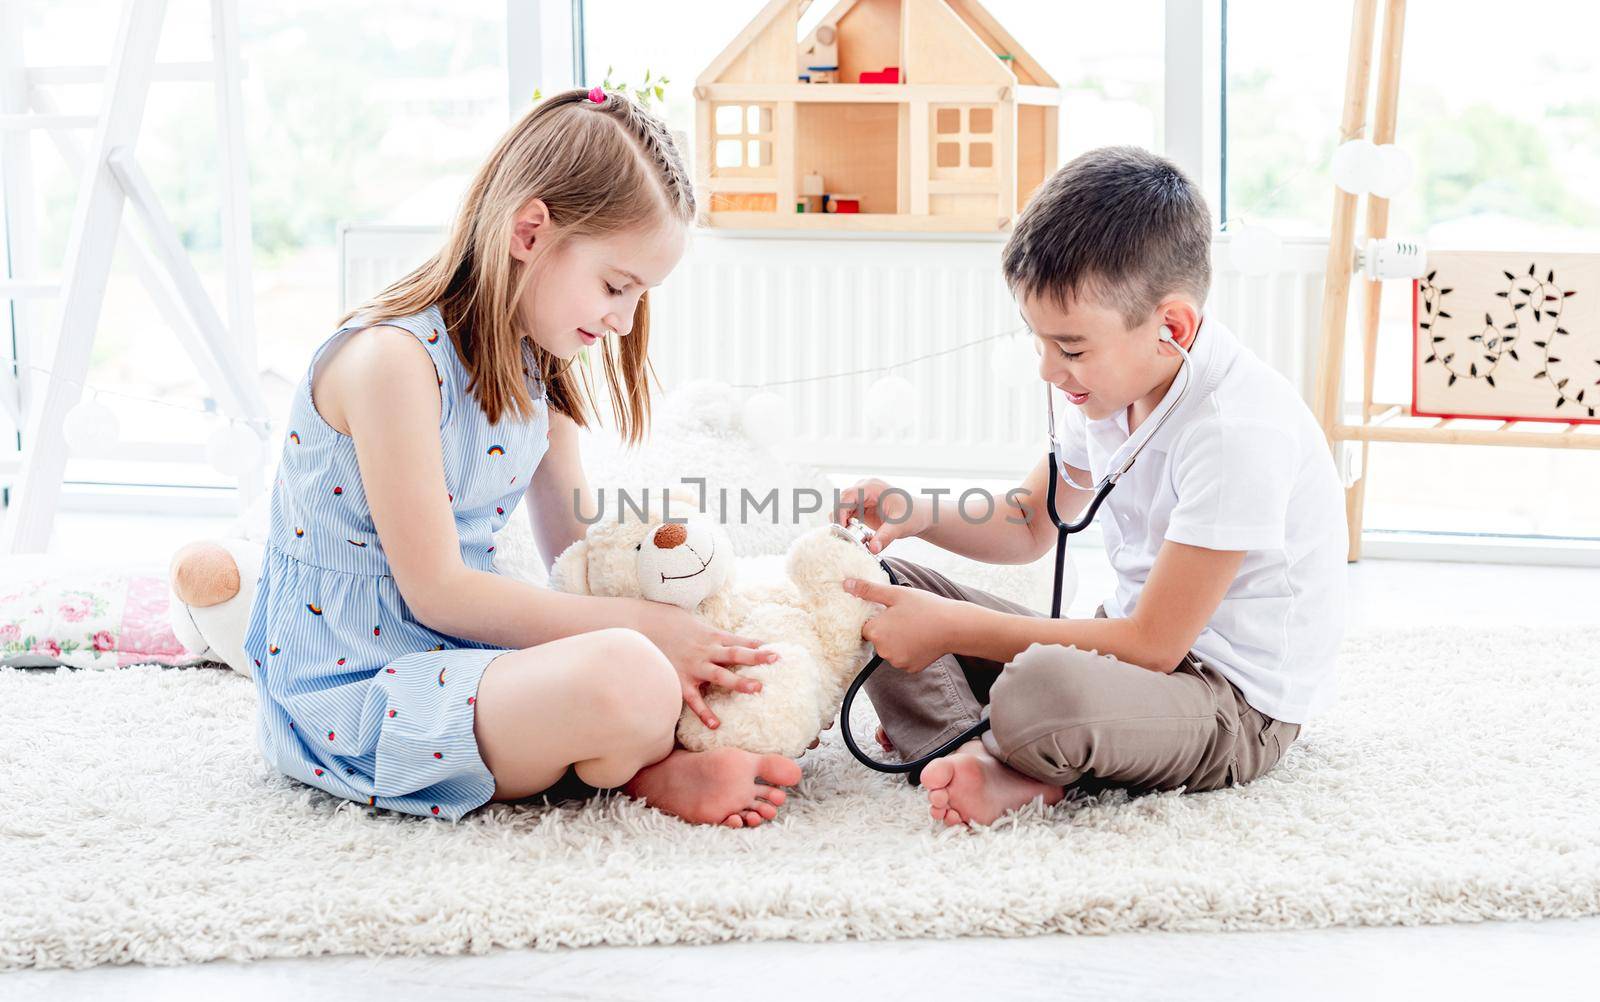 Children playing doctor with teddy bear by tan4ikk1